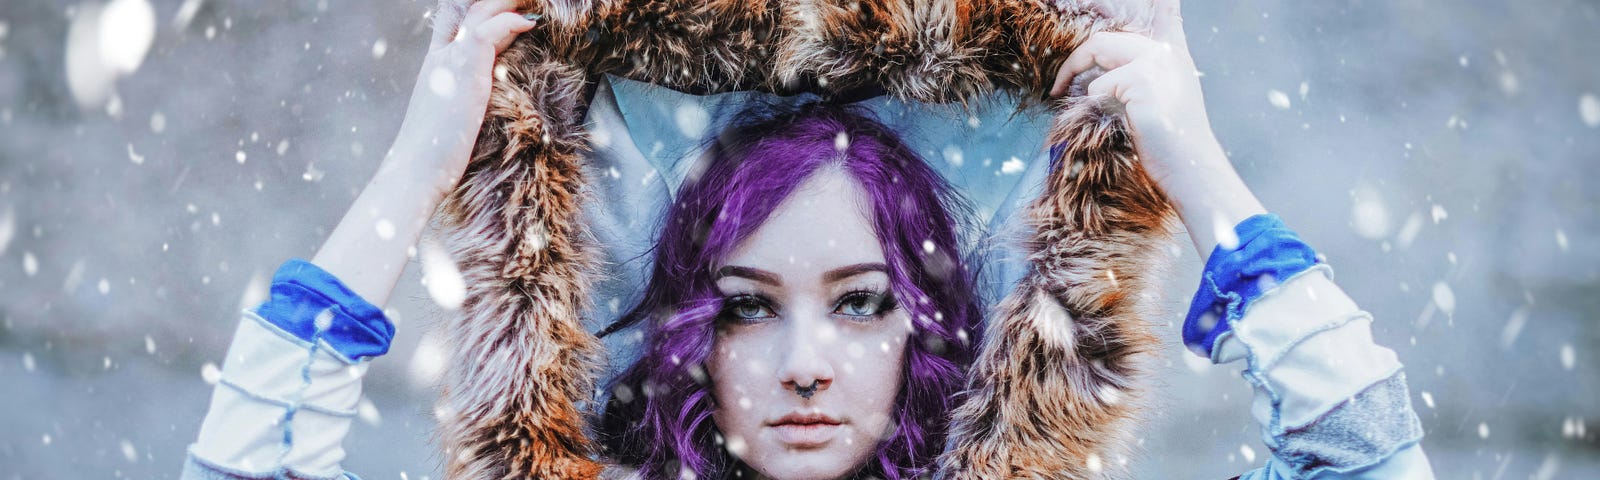 Young girl with purple hair and serious face pulling up her head covering to shelter from the rain and snow